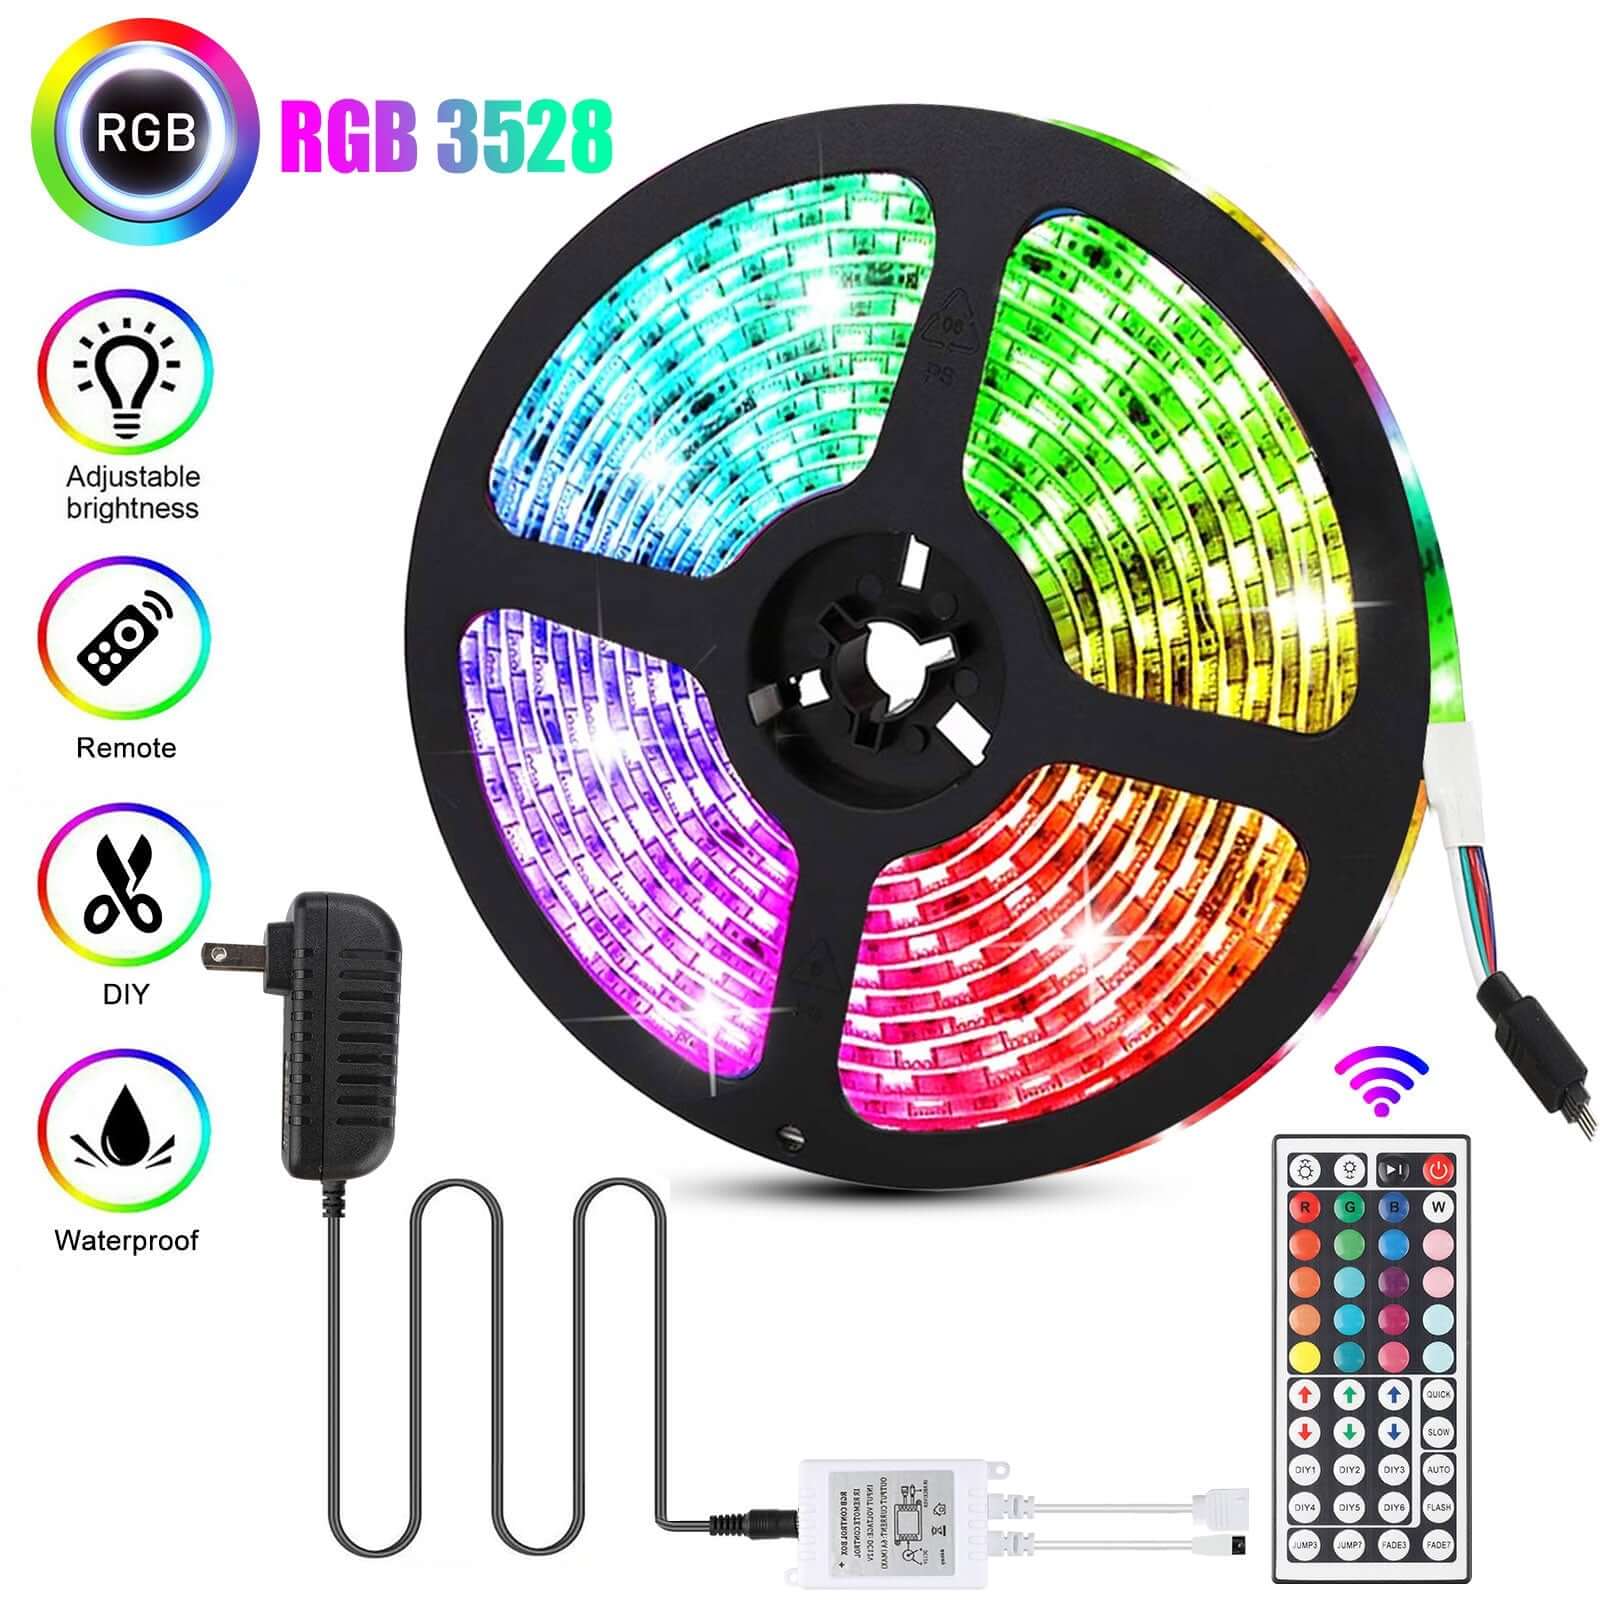 DAYBETTER LED Strip Light 32.8ft,44 Key Remote Control and 12V Power  Supply,Bedroom,Party,Room Decor(2 Rolls of 16.4ft) 